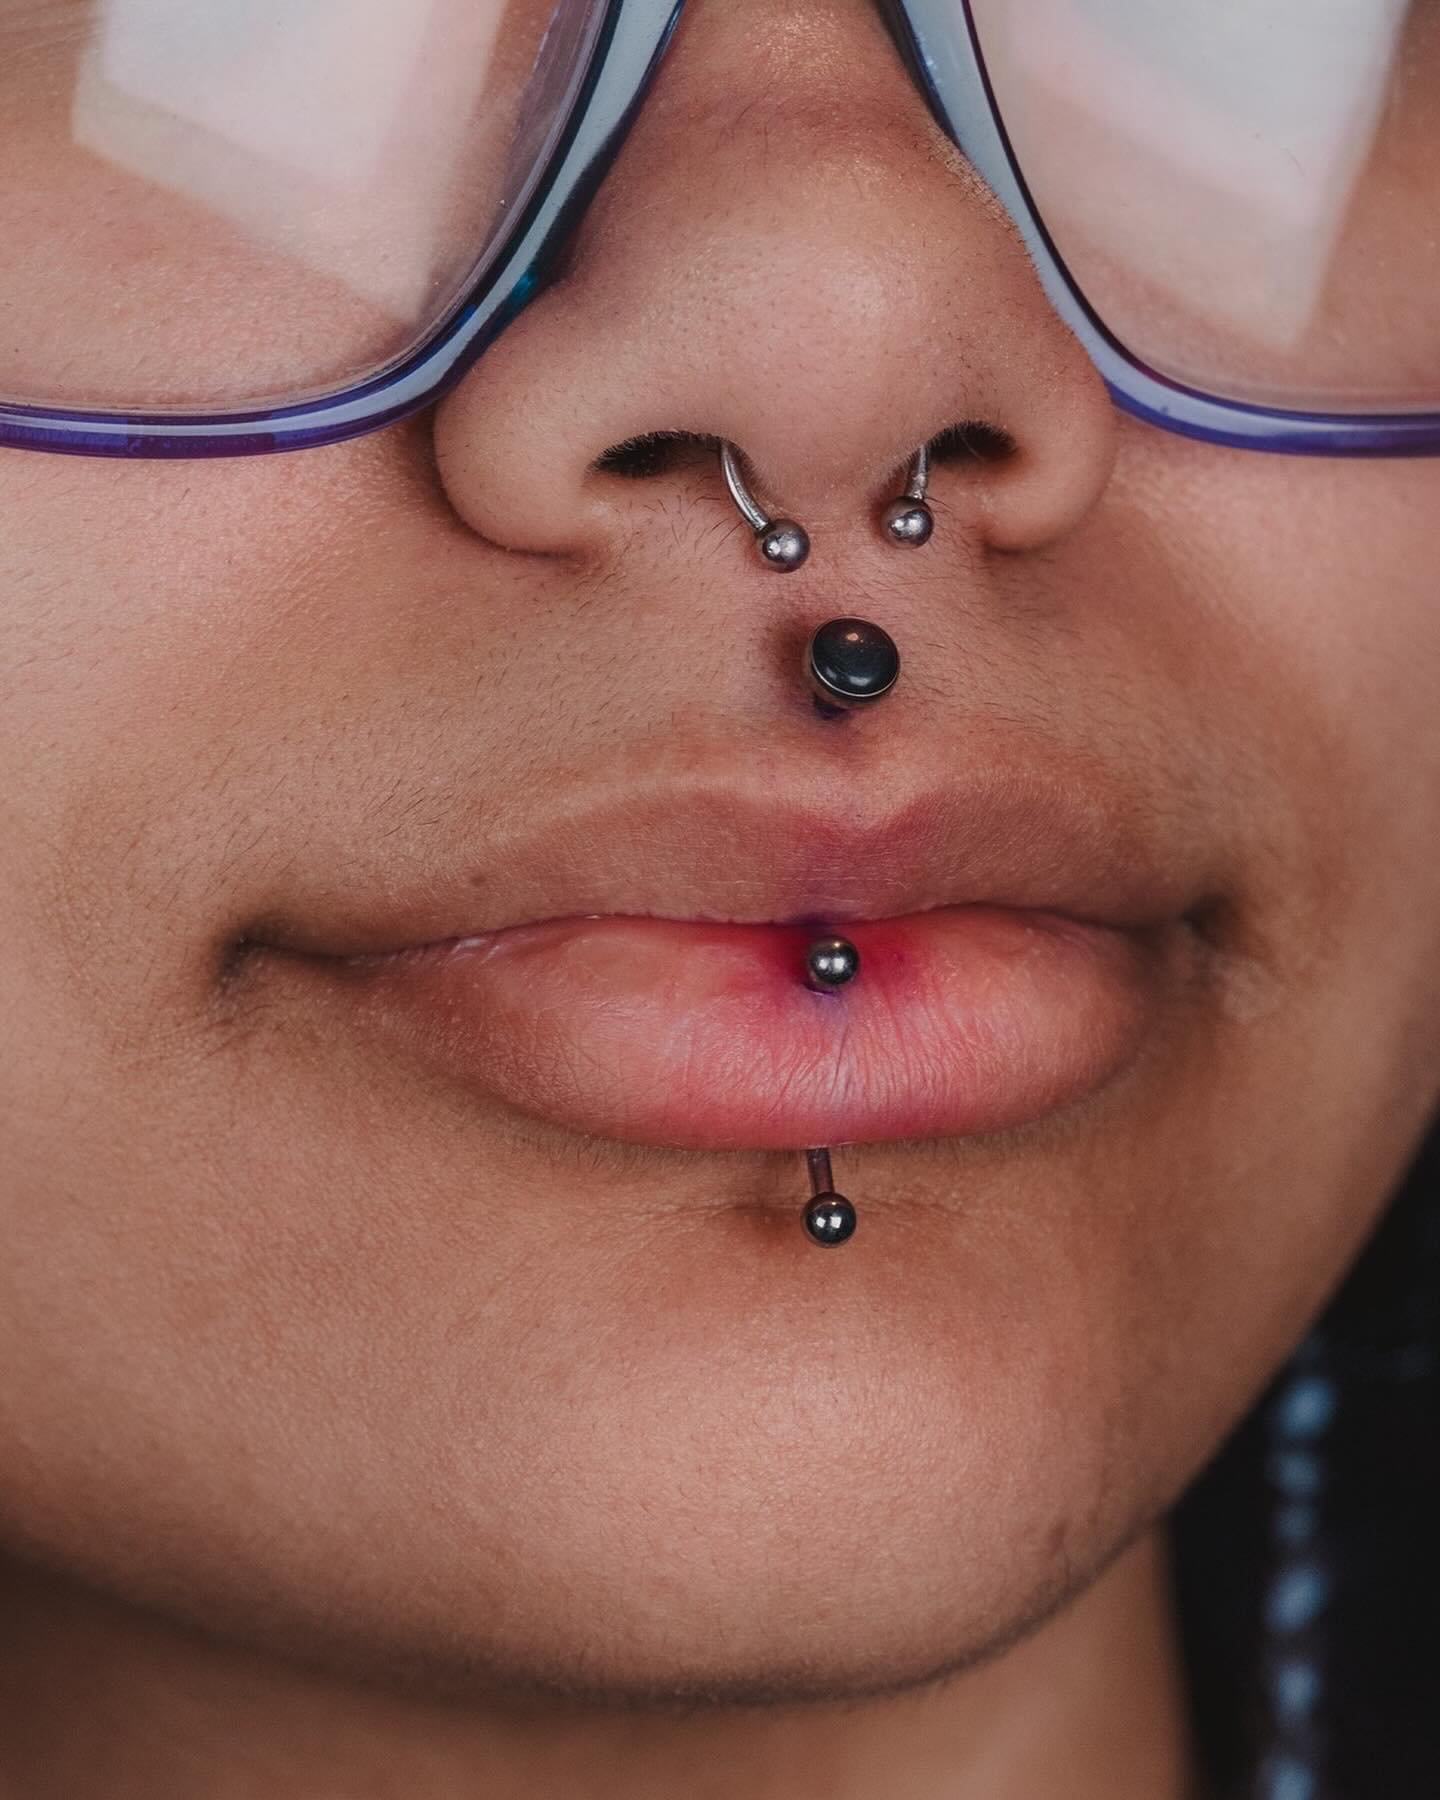 ALL THAT⛓️&zwj;💥
 
I HAVE 
 
A very cool set of additions for Ionna, with a vertical labret with a classic curve to match the septum jewelry, and a philtrum with an onyx cab! Both performed by Tanner🤺👻
⠀⠀⠀⠀⠀⠀⠀⠀⠀
~  @research.chemicals ~ 
⠀⠀⠀⠀⠀⠀⠀⠀⠀